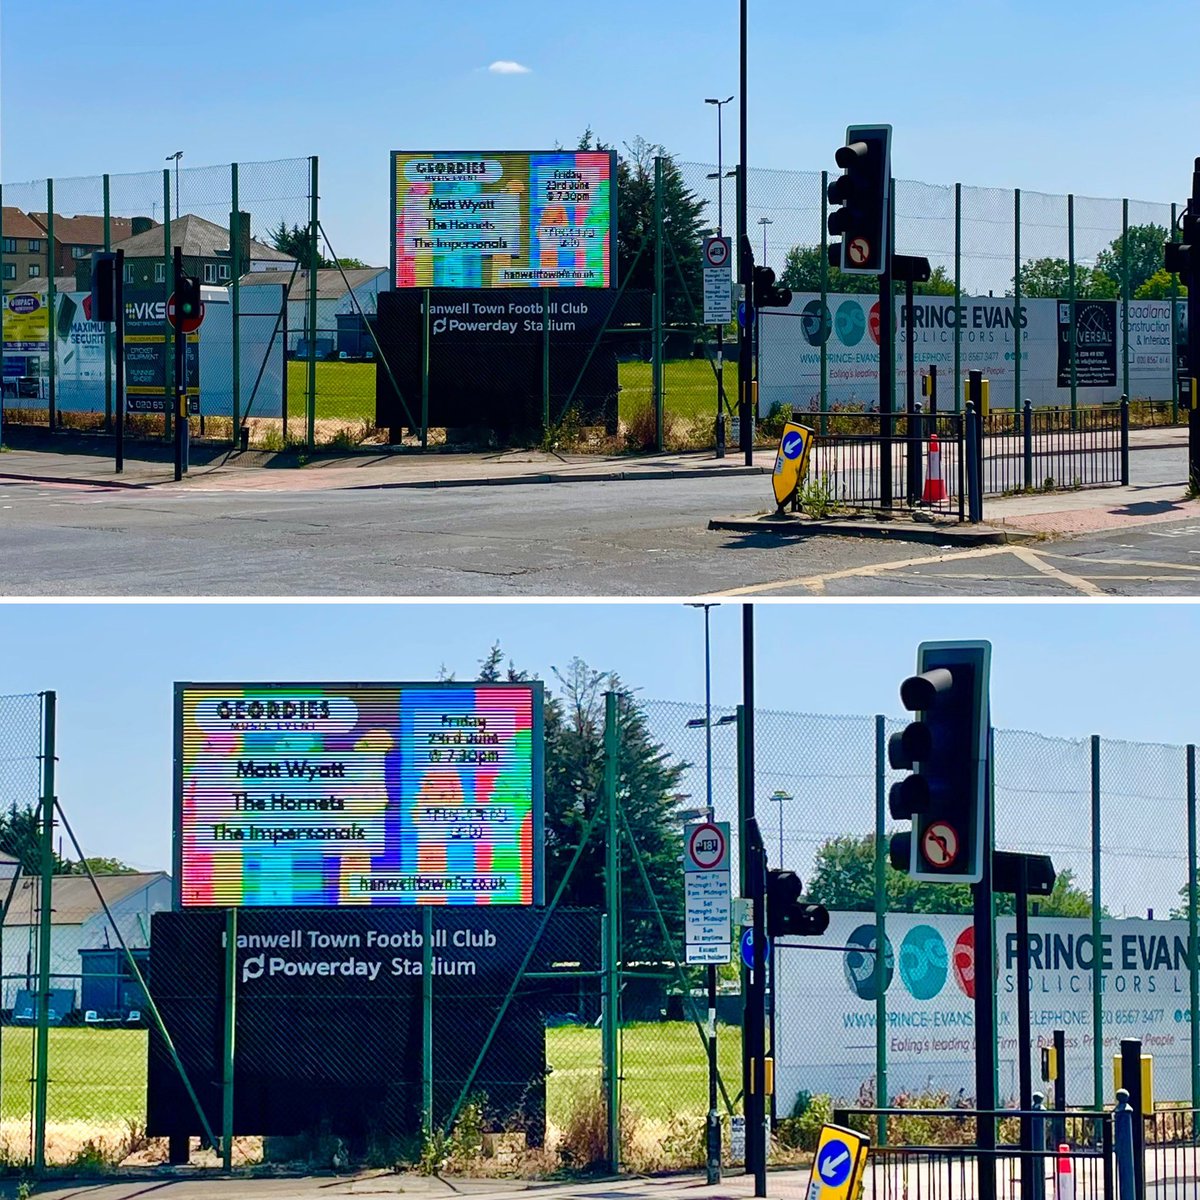 Our digital event poster is so big it can be seen from…. erm the A40 😇

Only 5 days left to go till we welcome:
@MattWyattUK 
@TheHornets17 
@THEiMPERSONALS 

#Geordies 
#LiveMusic #LocalBands
#Hanwell #W7
#UB6 #W3 #W5 #W13